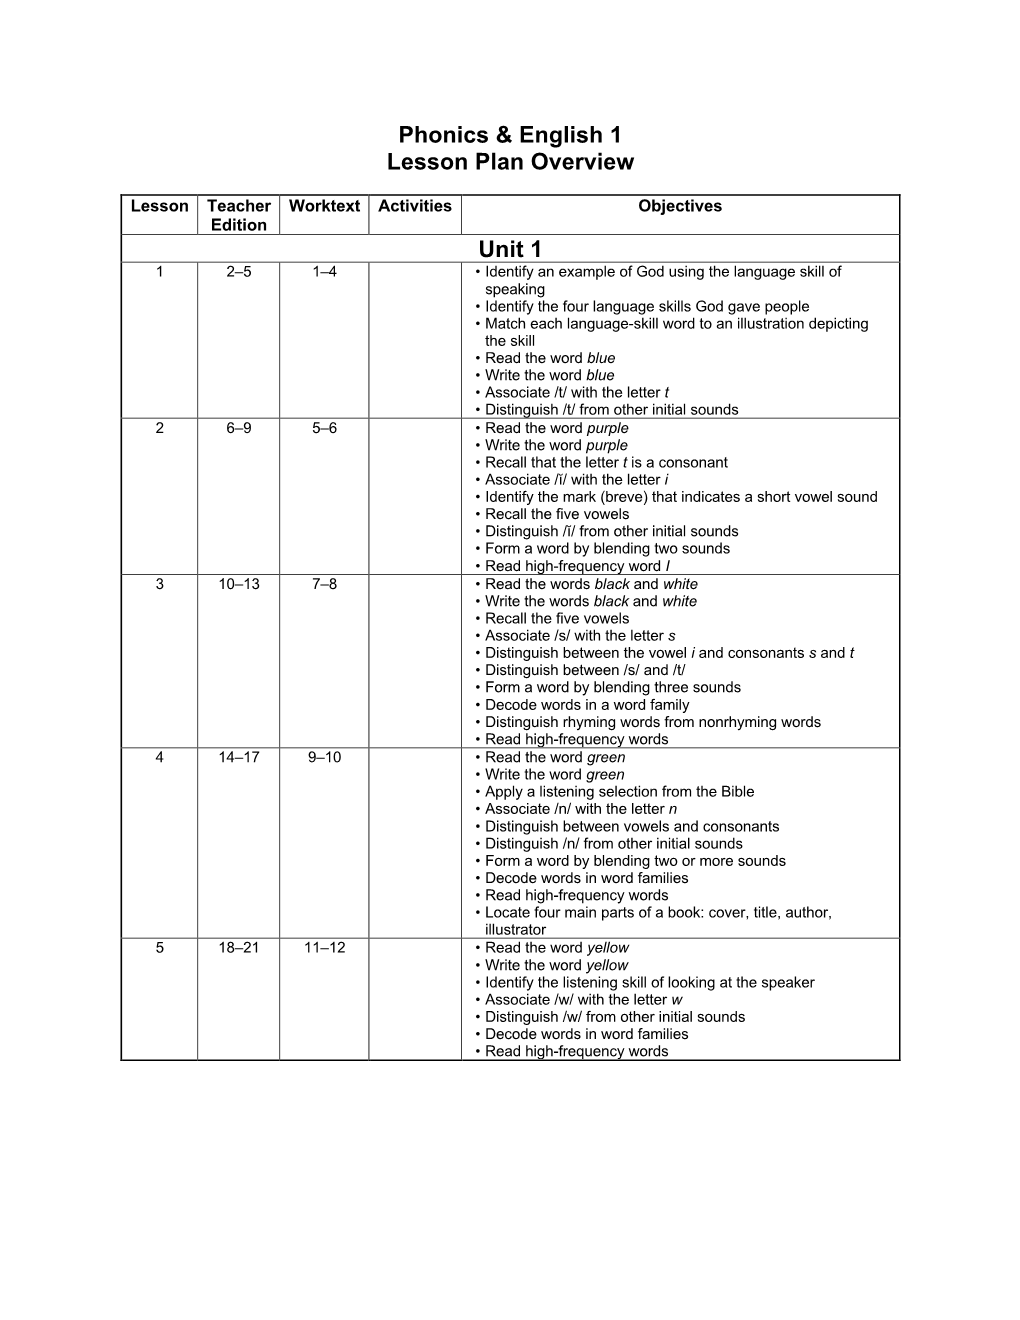 Lesson Plan Overview for Phonics and English 1, 4Th